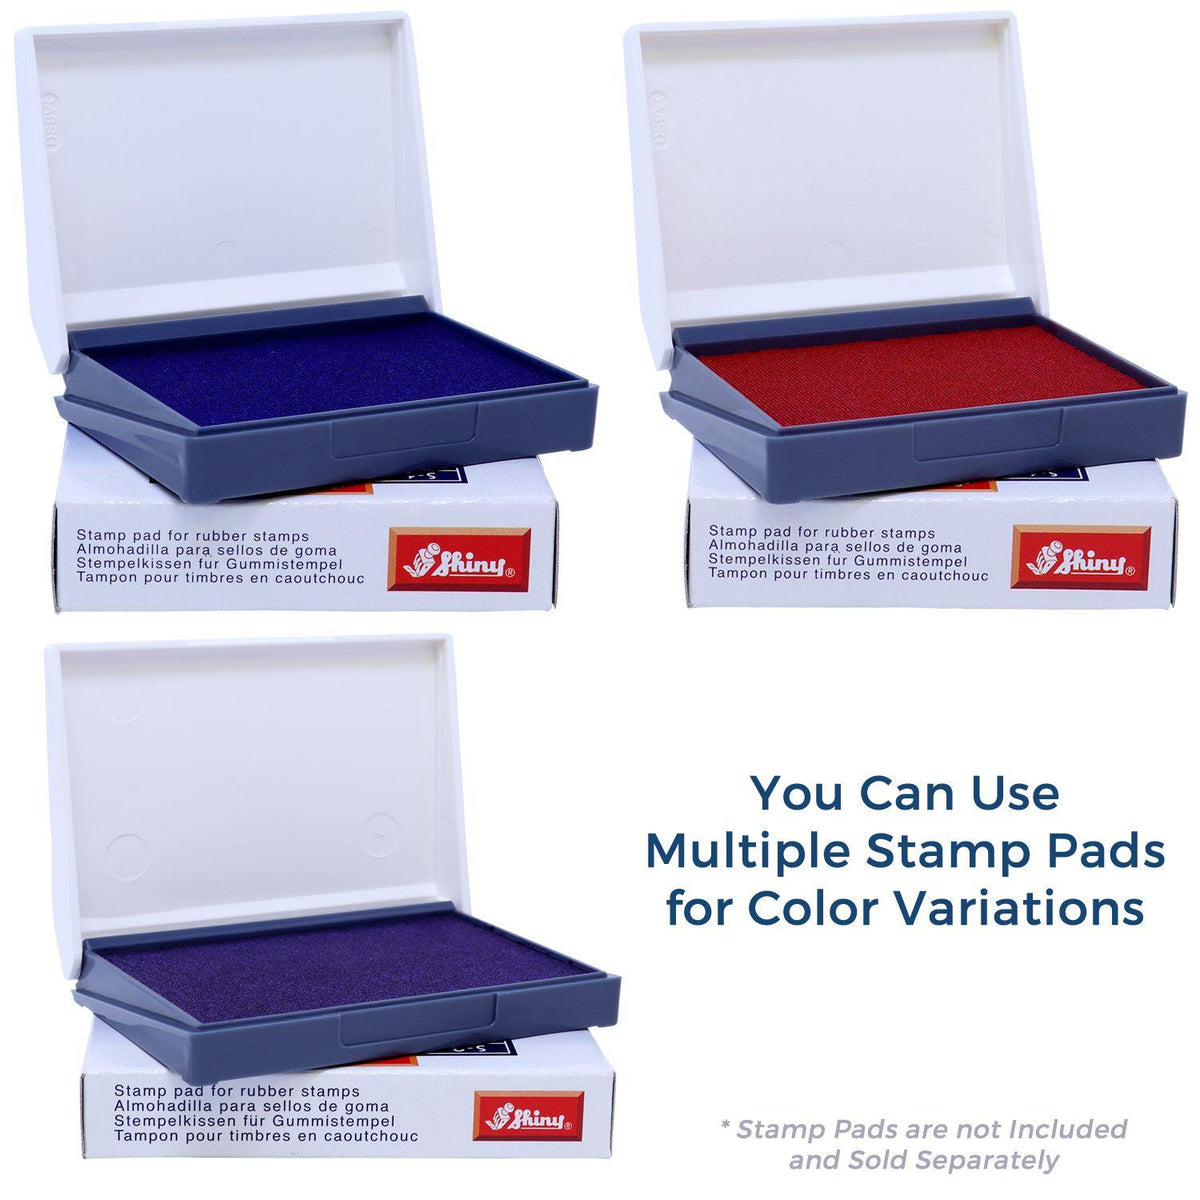 Stamp Pads for Covid-19 Tested Rubber Stamp Available